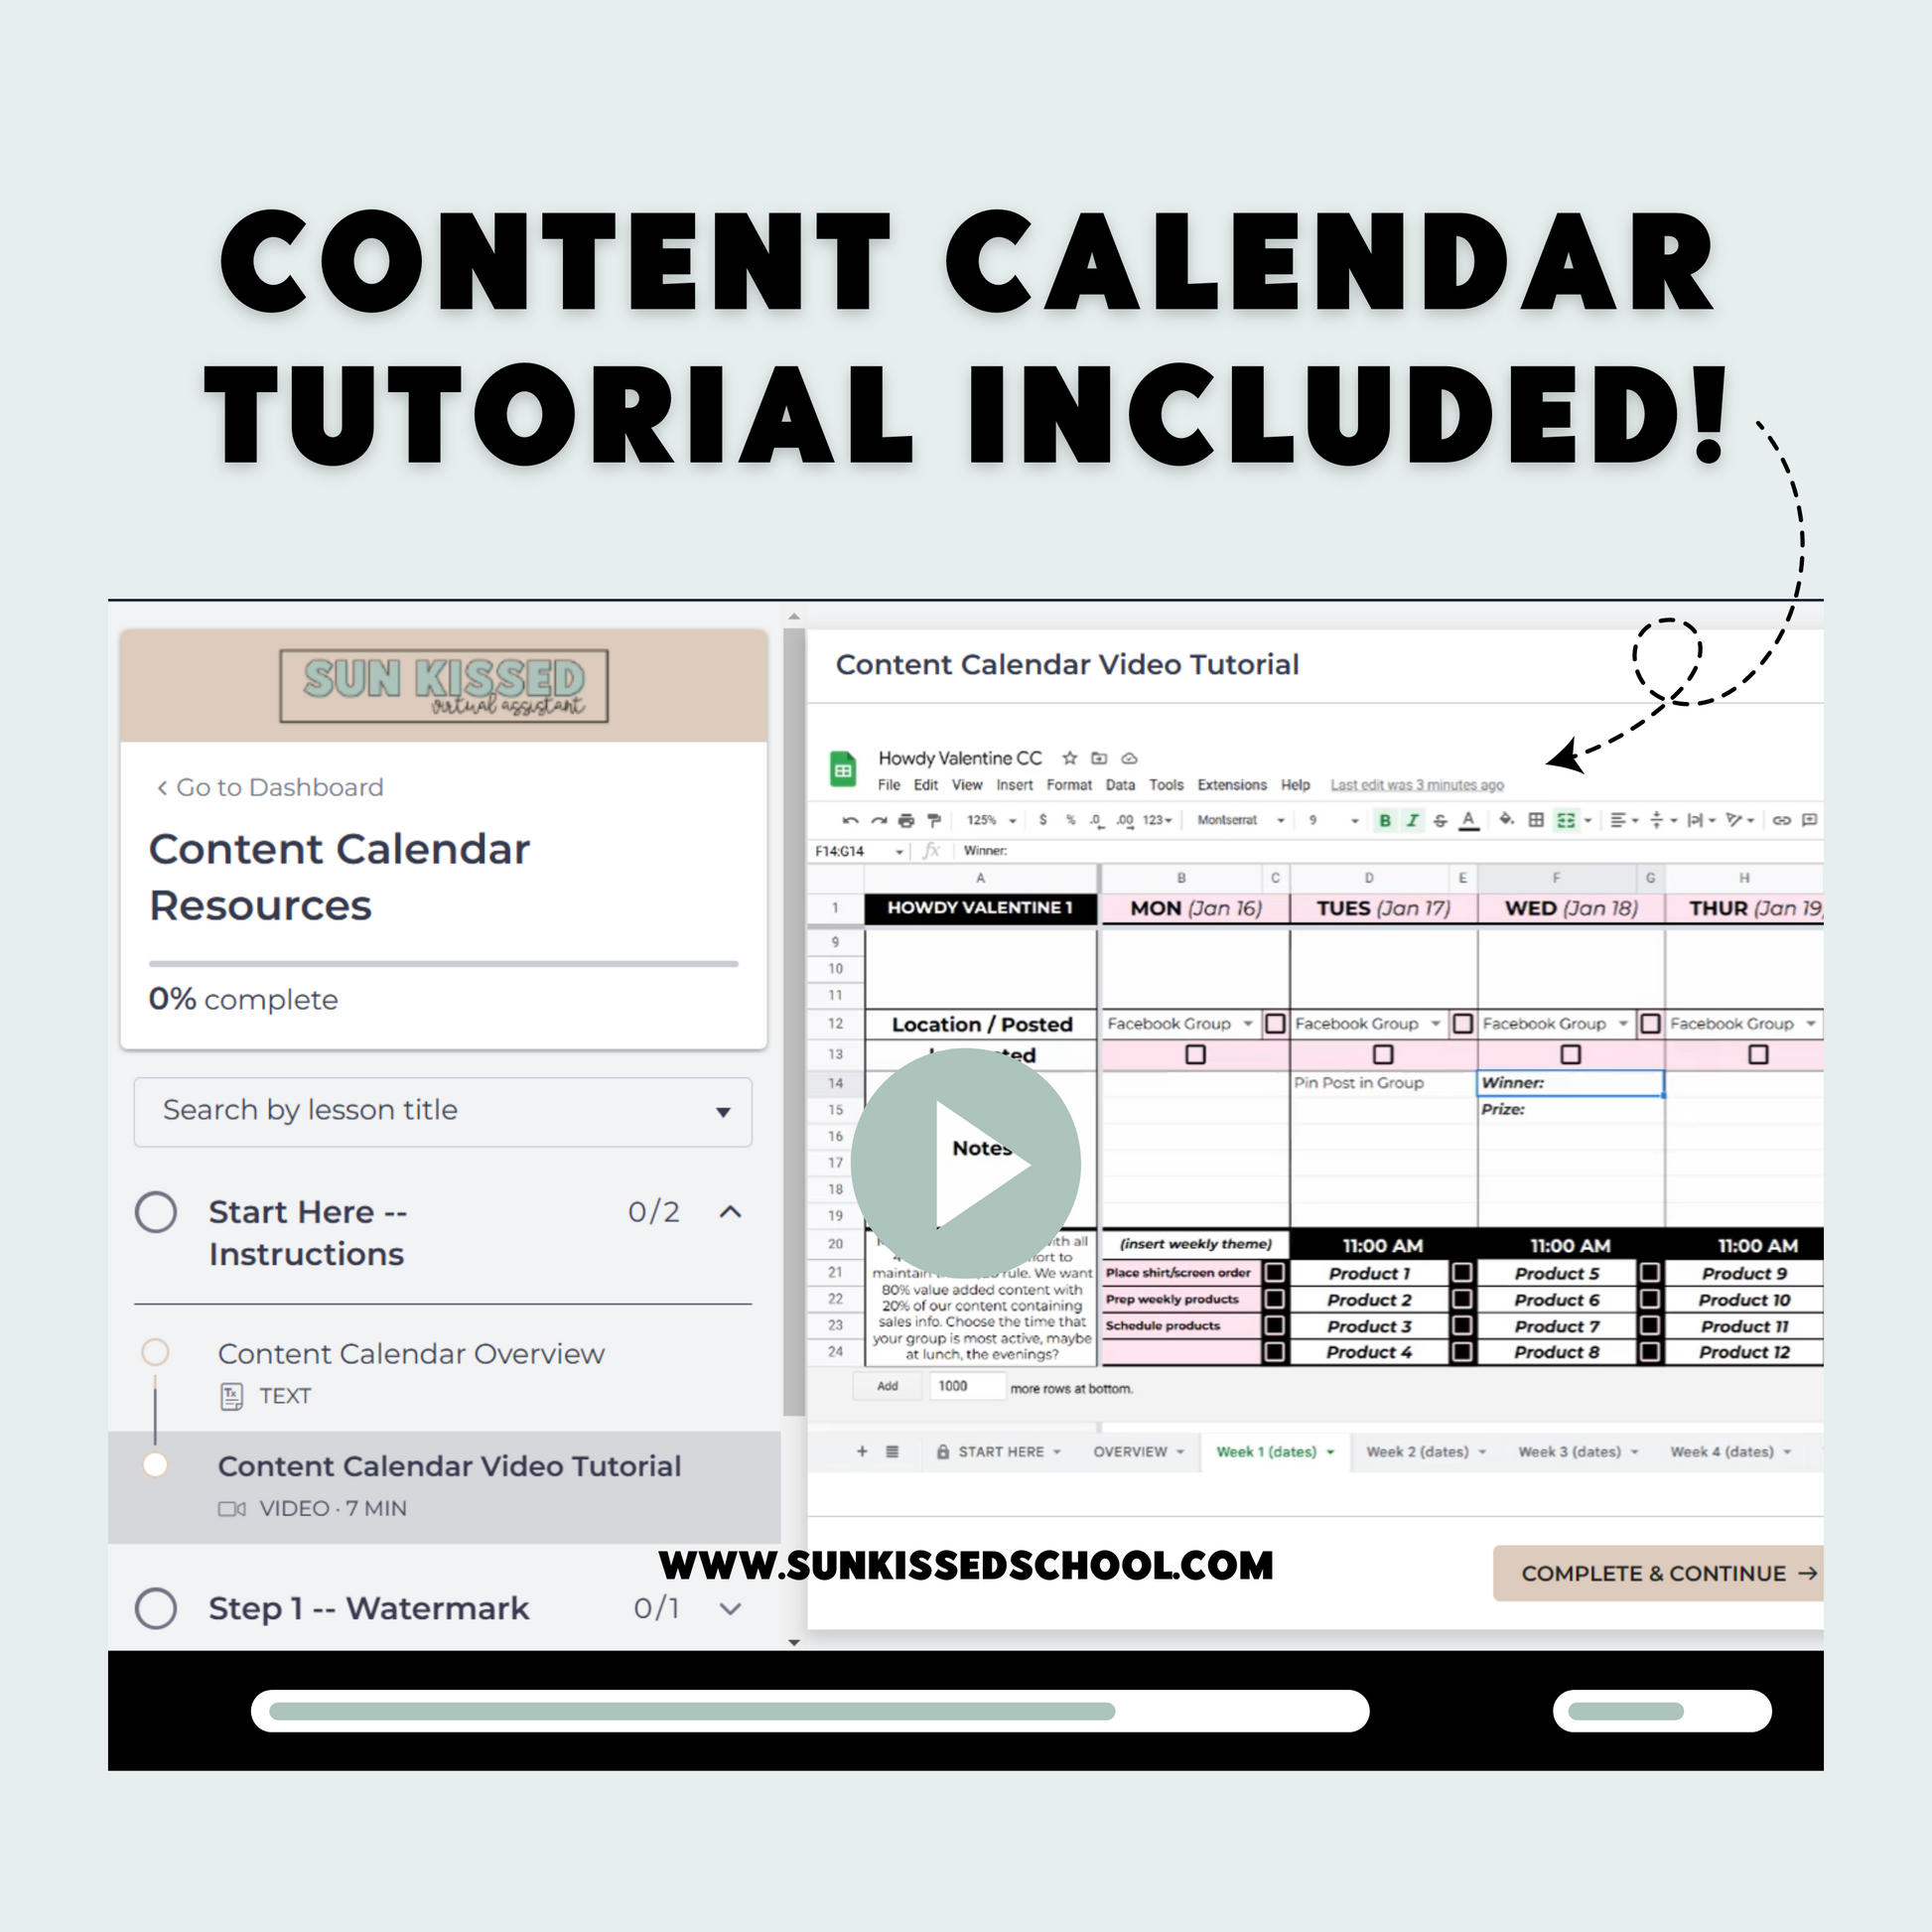 Going to School Content Calendar themed social media plan | Sun Kissed Virtual Assistant